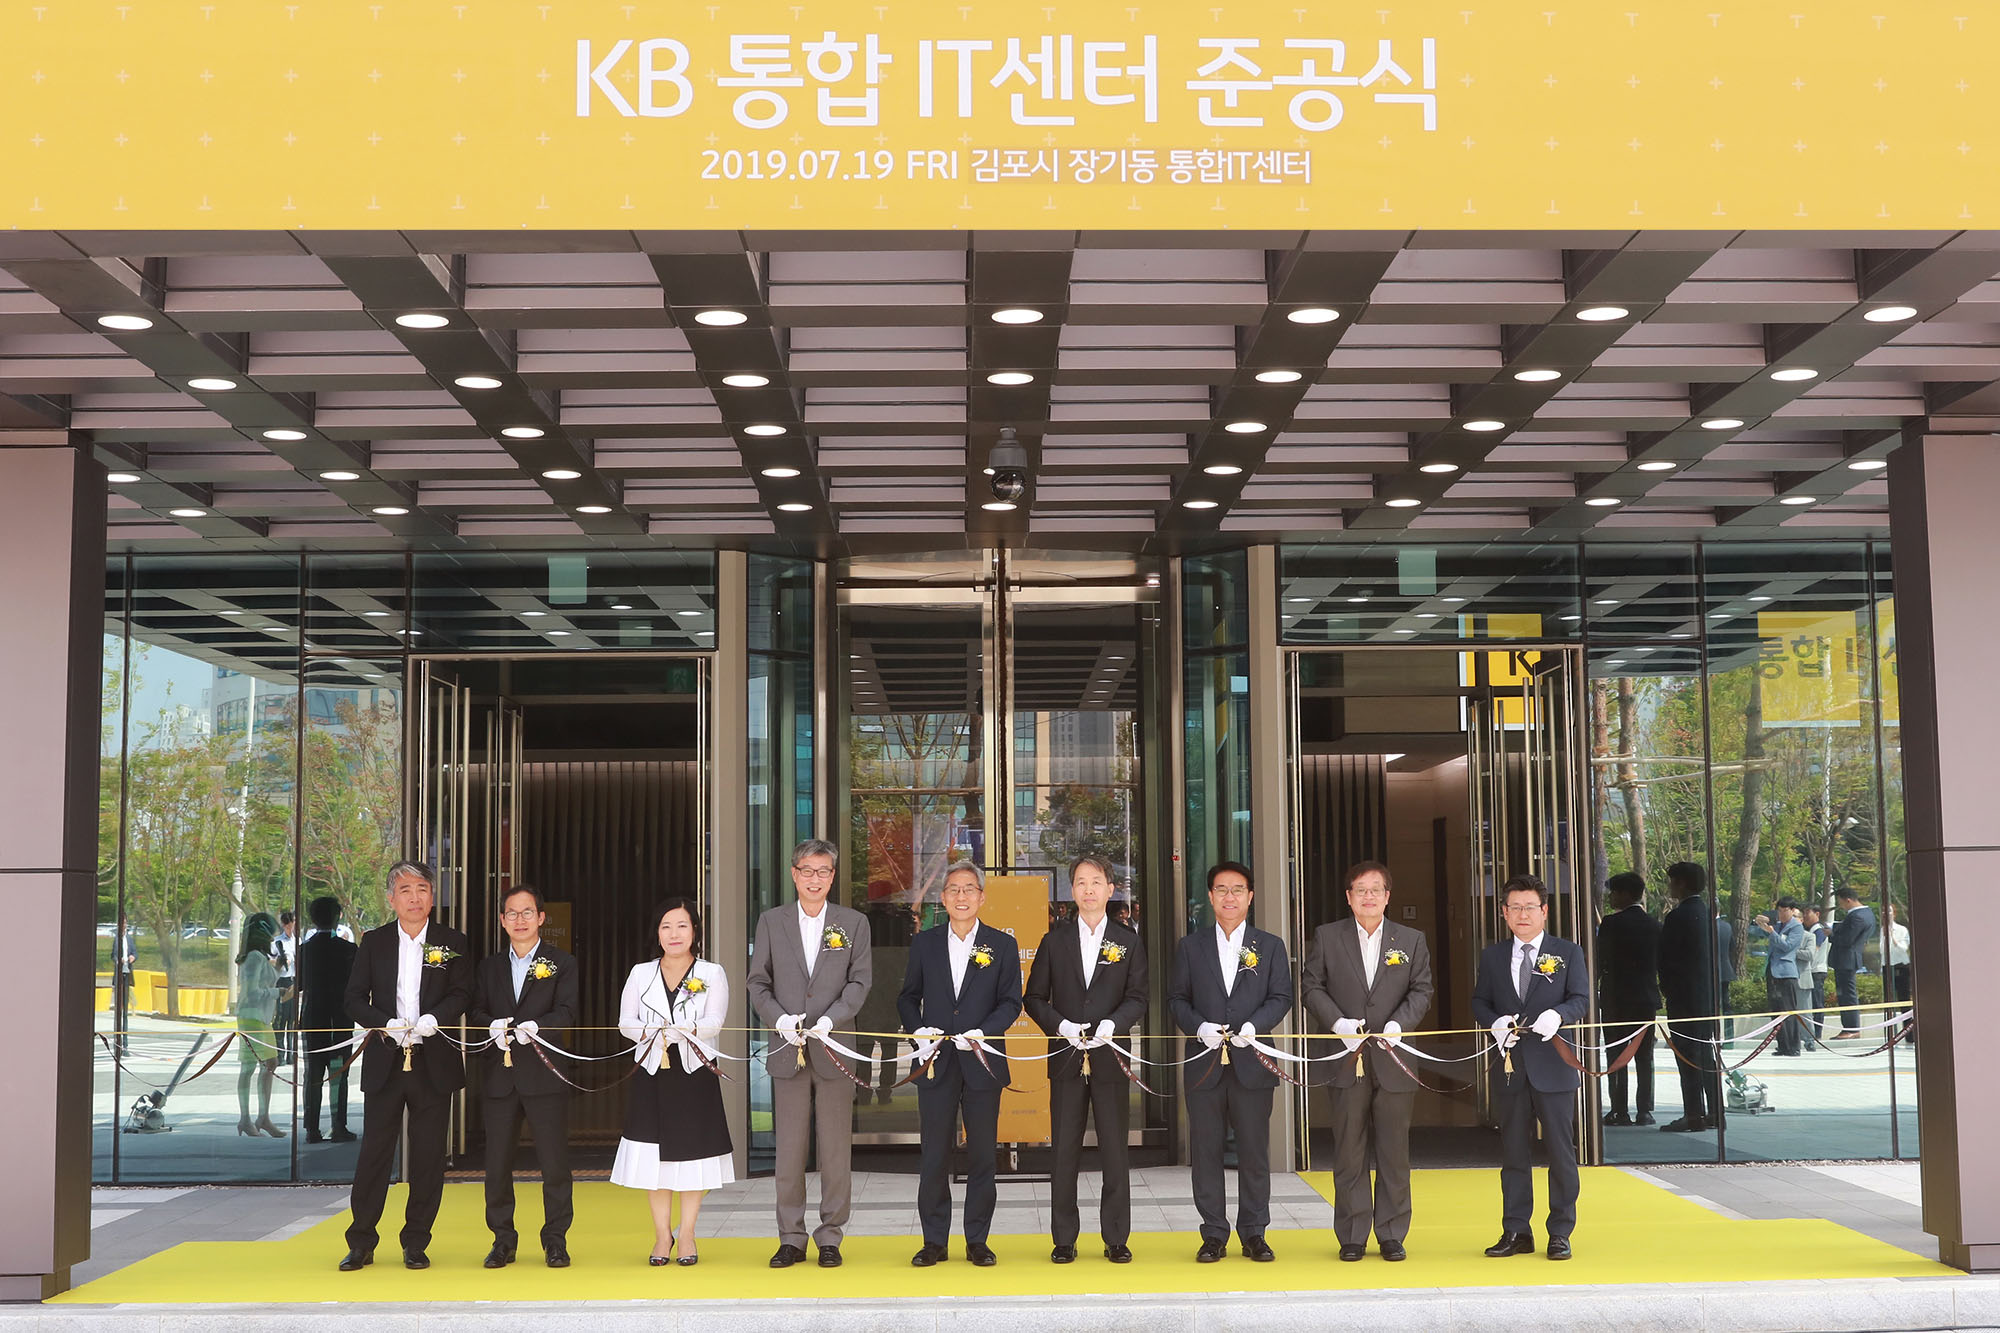 Construction of 'KB Integrated IT Center' in Gimpo Hangang New Town, concentrating IT infrastructure